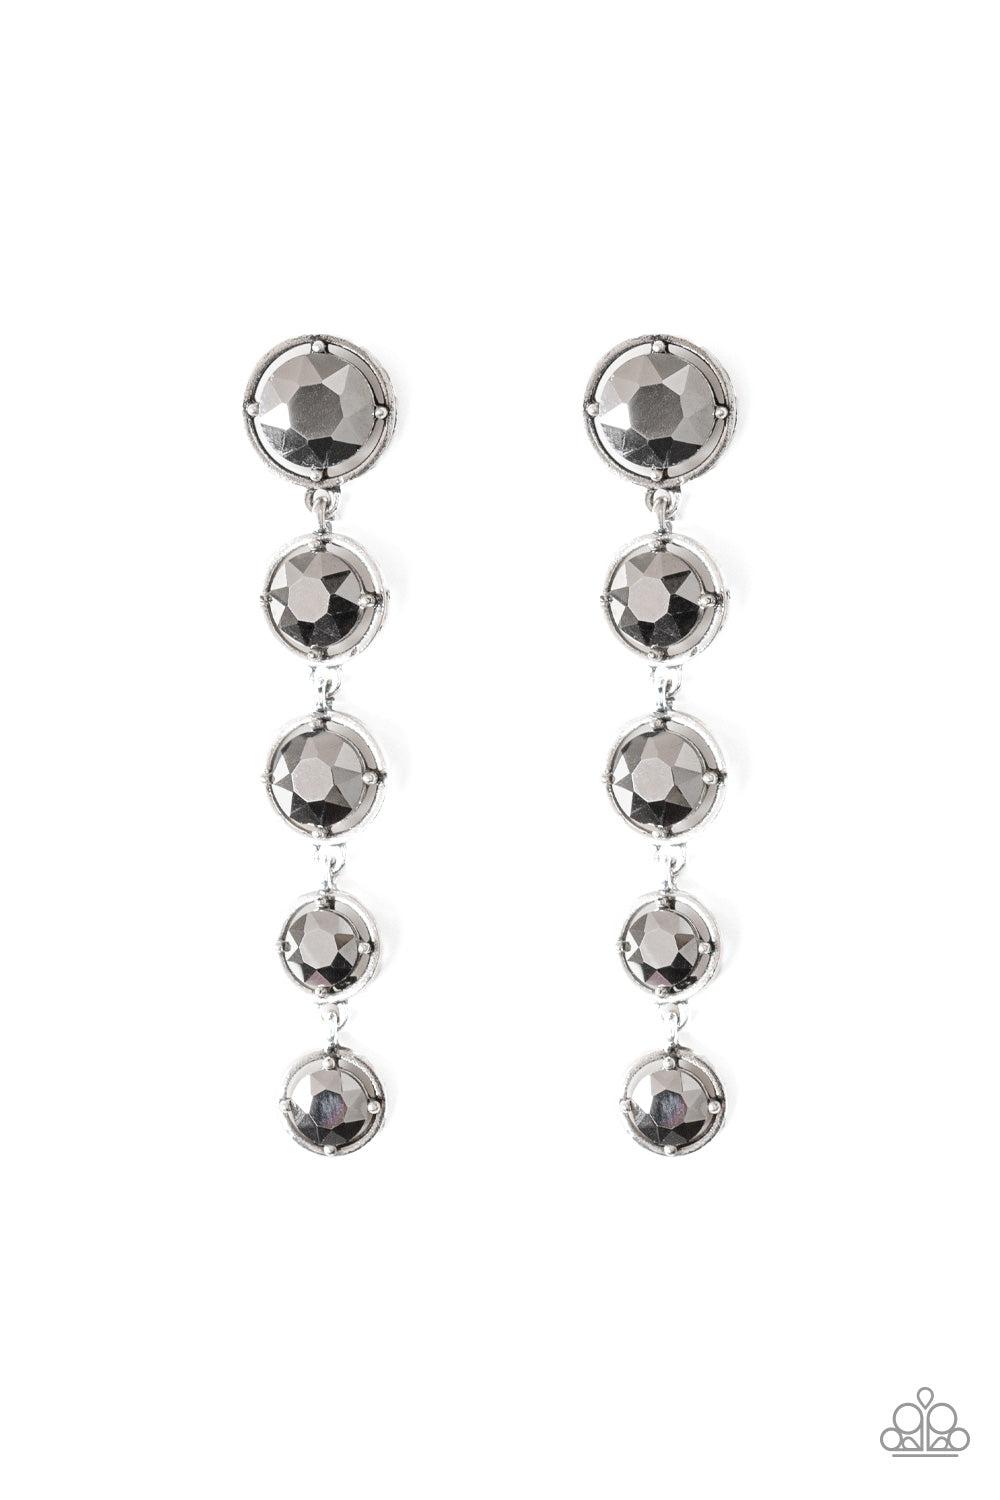 Paparazzi Accessories Drippin In Starlight - Silver Earrings - Lady T Accessories